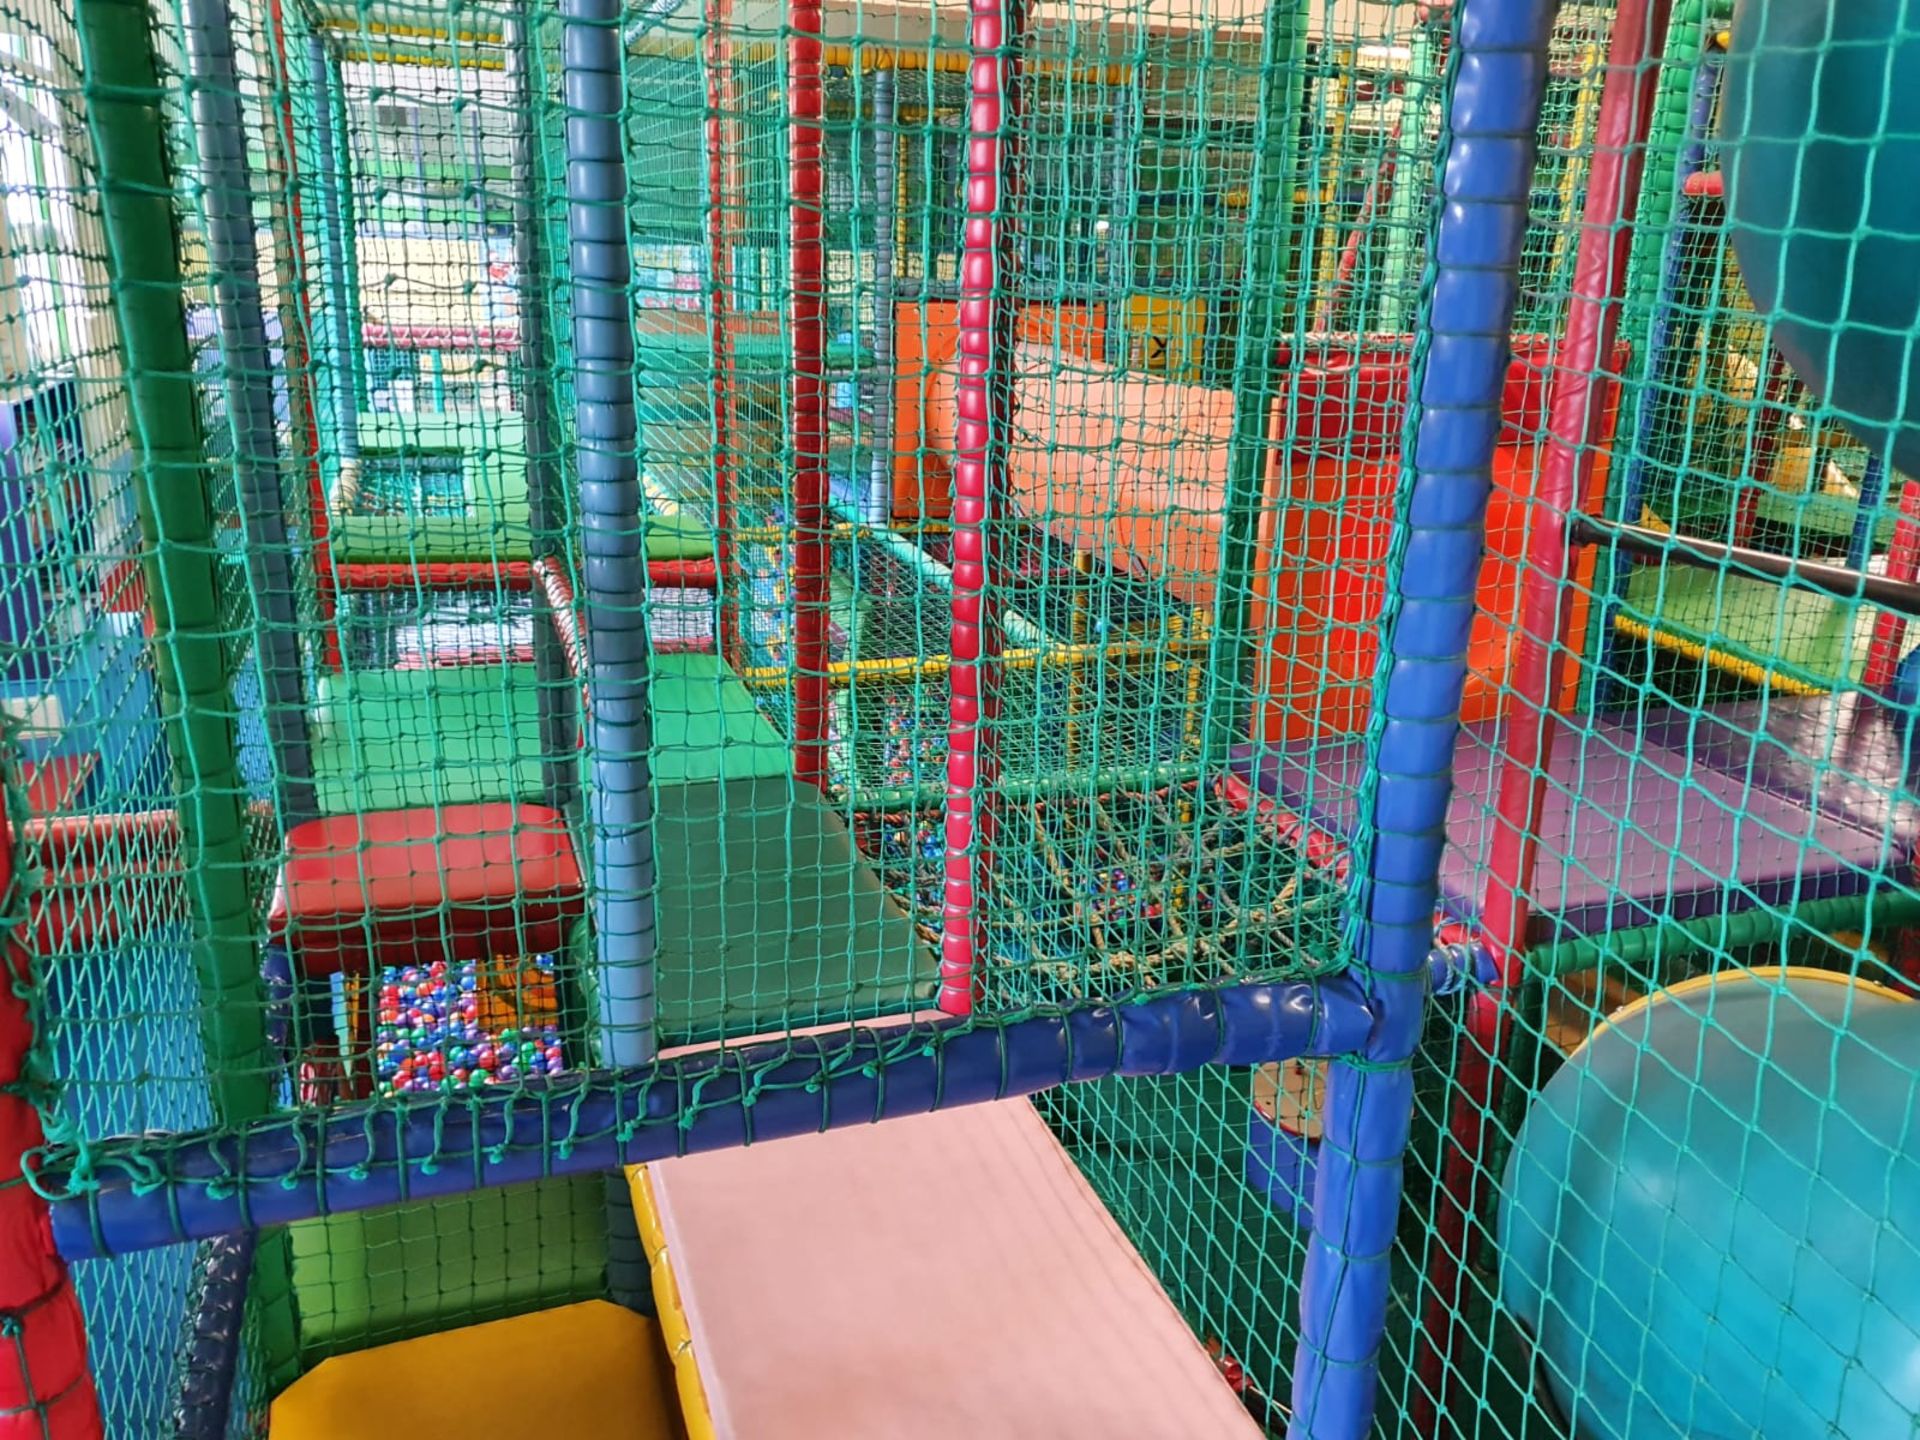 Bramleys Big Adventure Playground - Giant Action-Packed Playcentre With Slides, Zip Line Swings, - Image 125 of 128